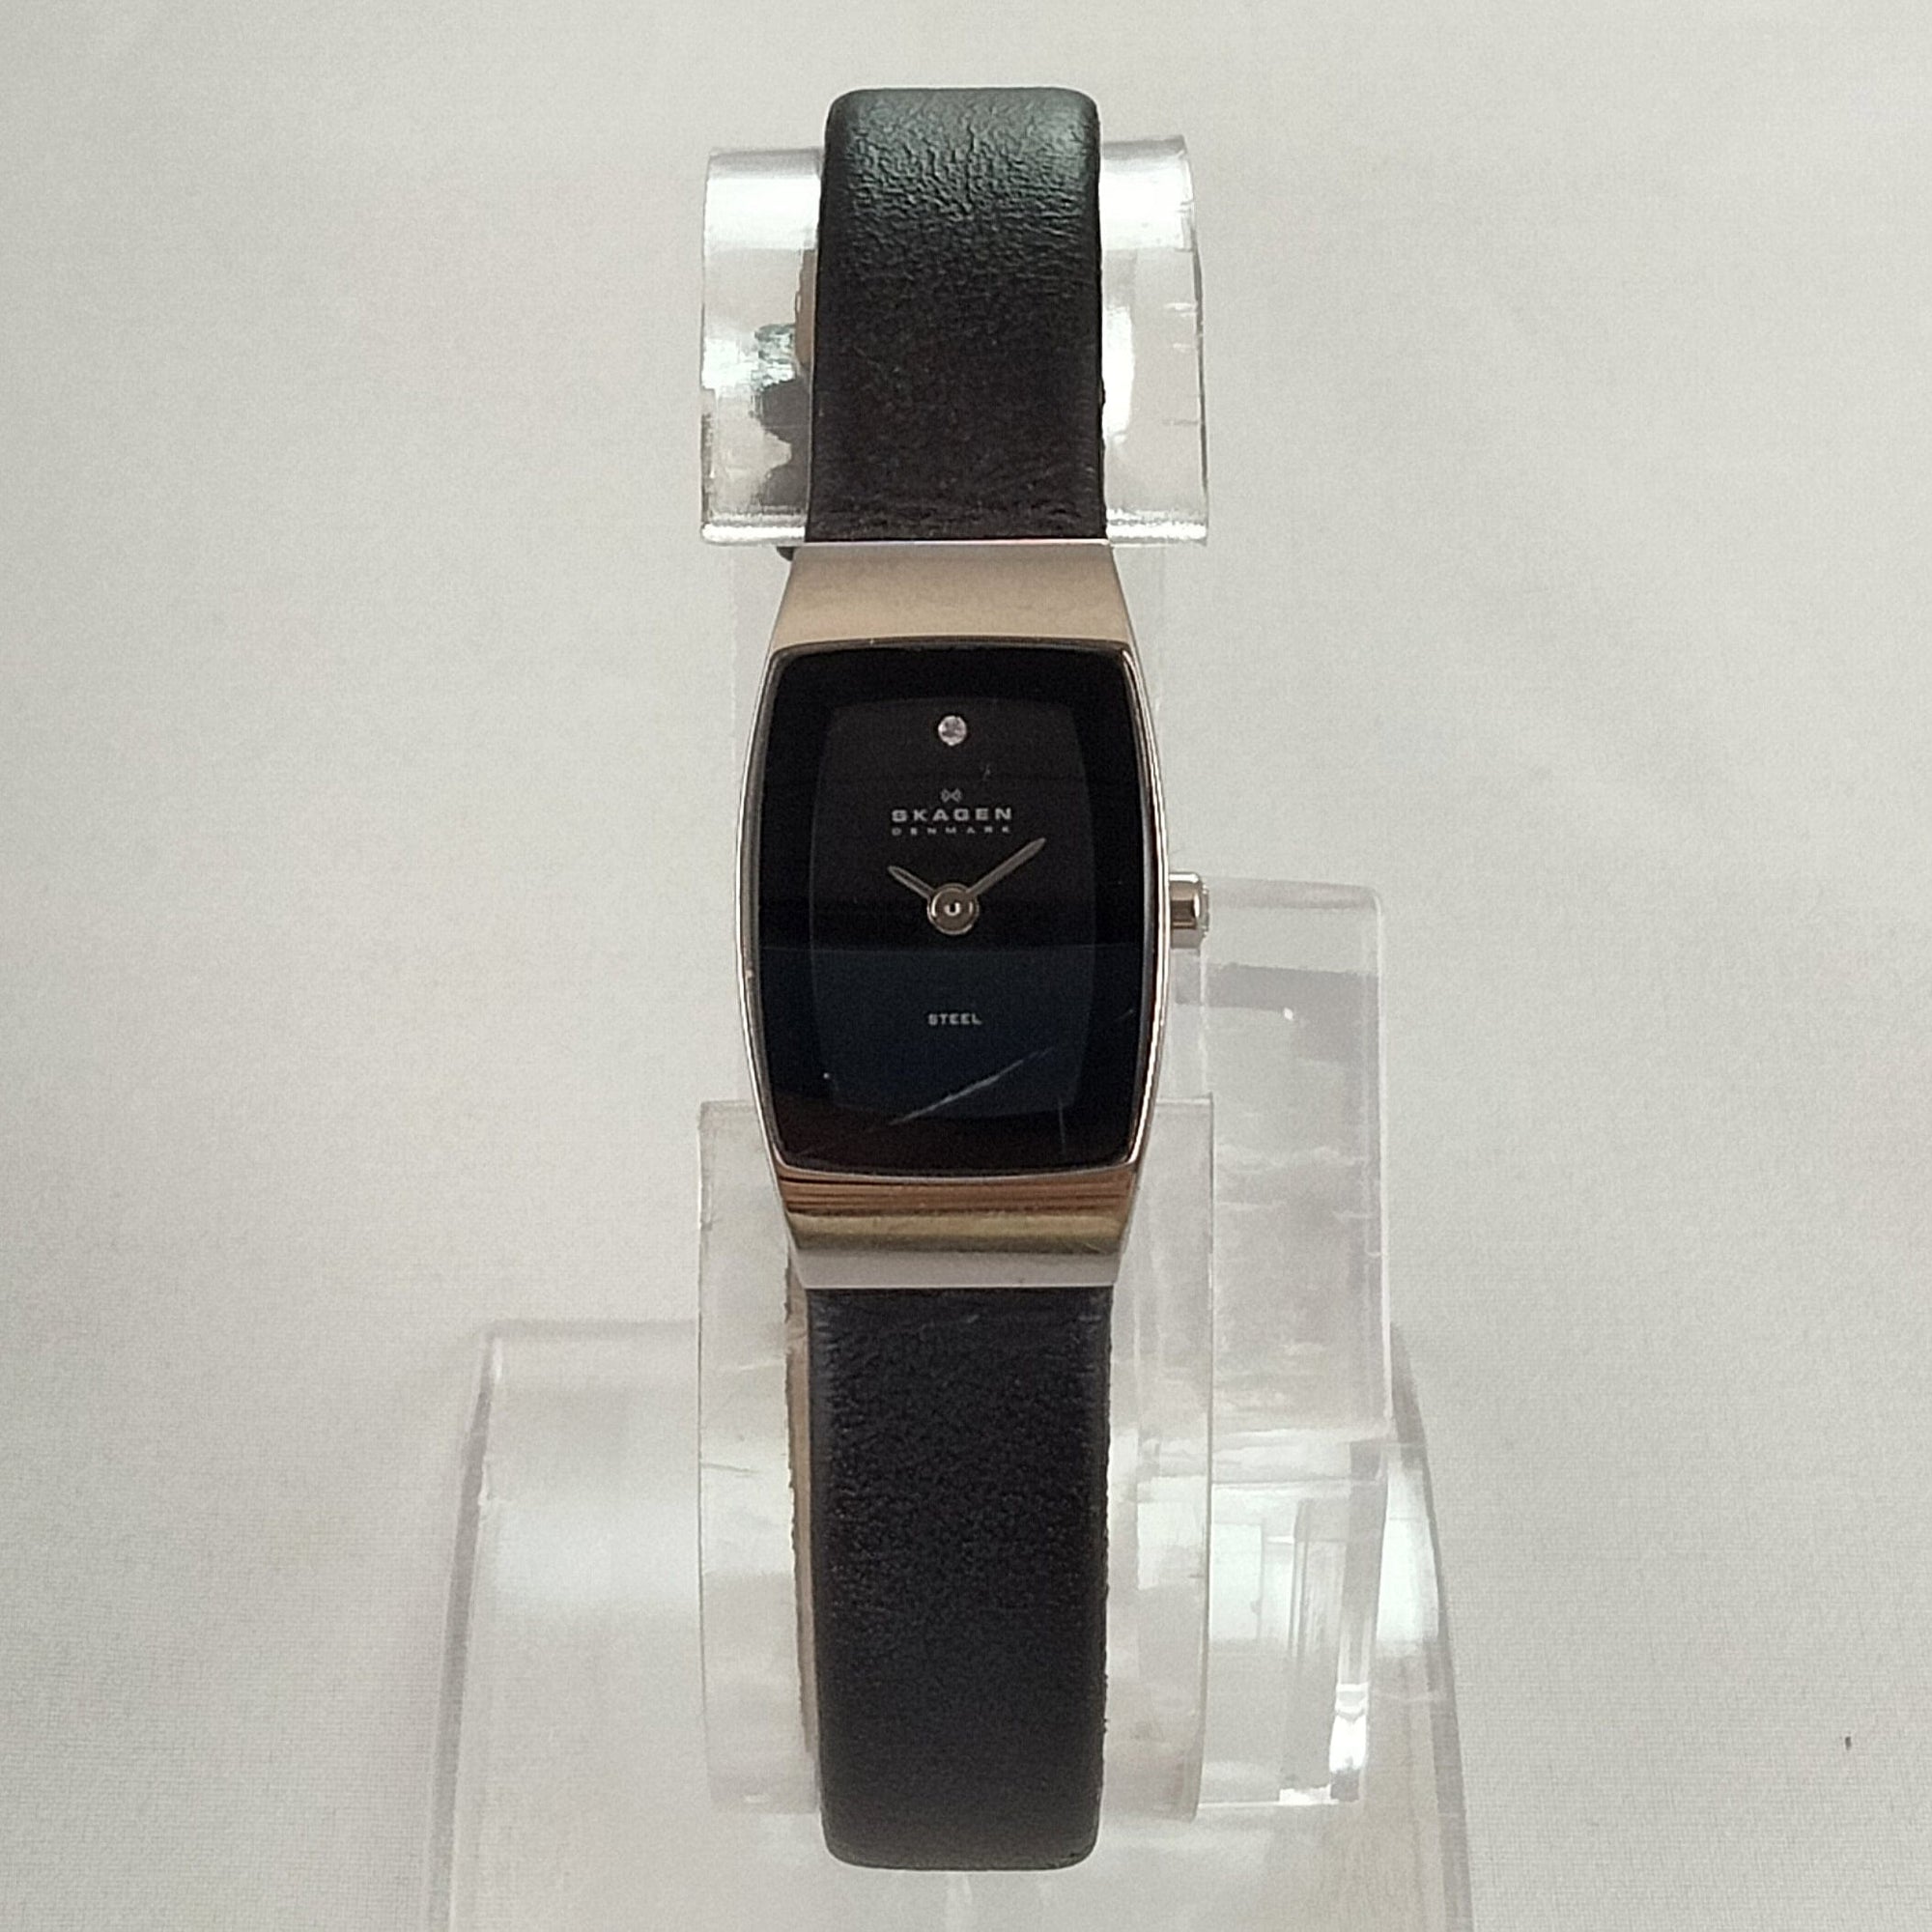 I Like Mikes Mid Century Modern Watches Skagen Women's Stainless Steel Rectangular Watch, Black Dial, Black Leather Strap